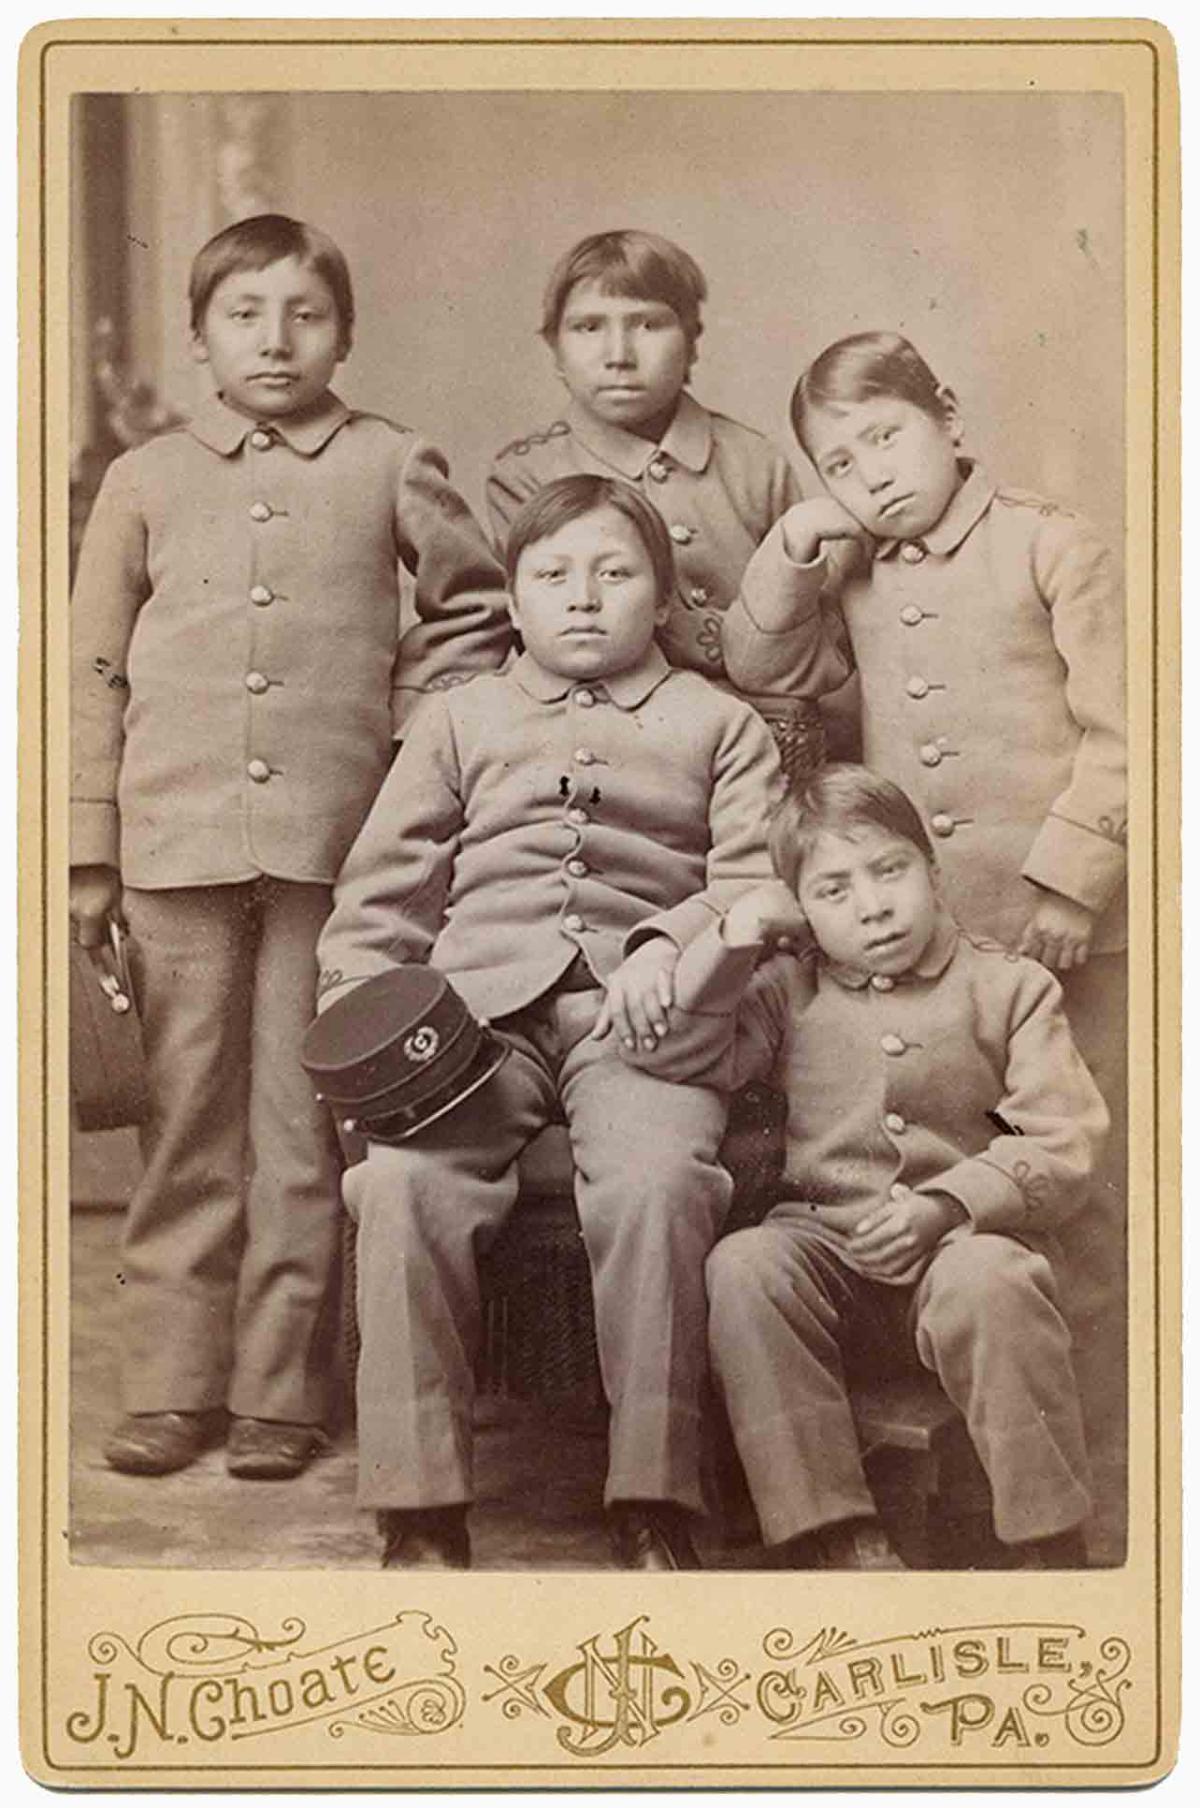 Sepia photograph of 5 young Indian boys in school uniform.